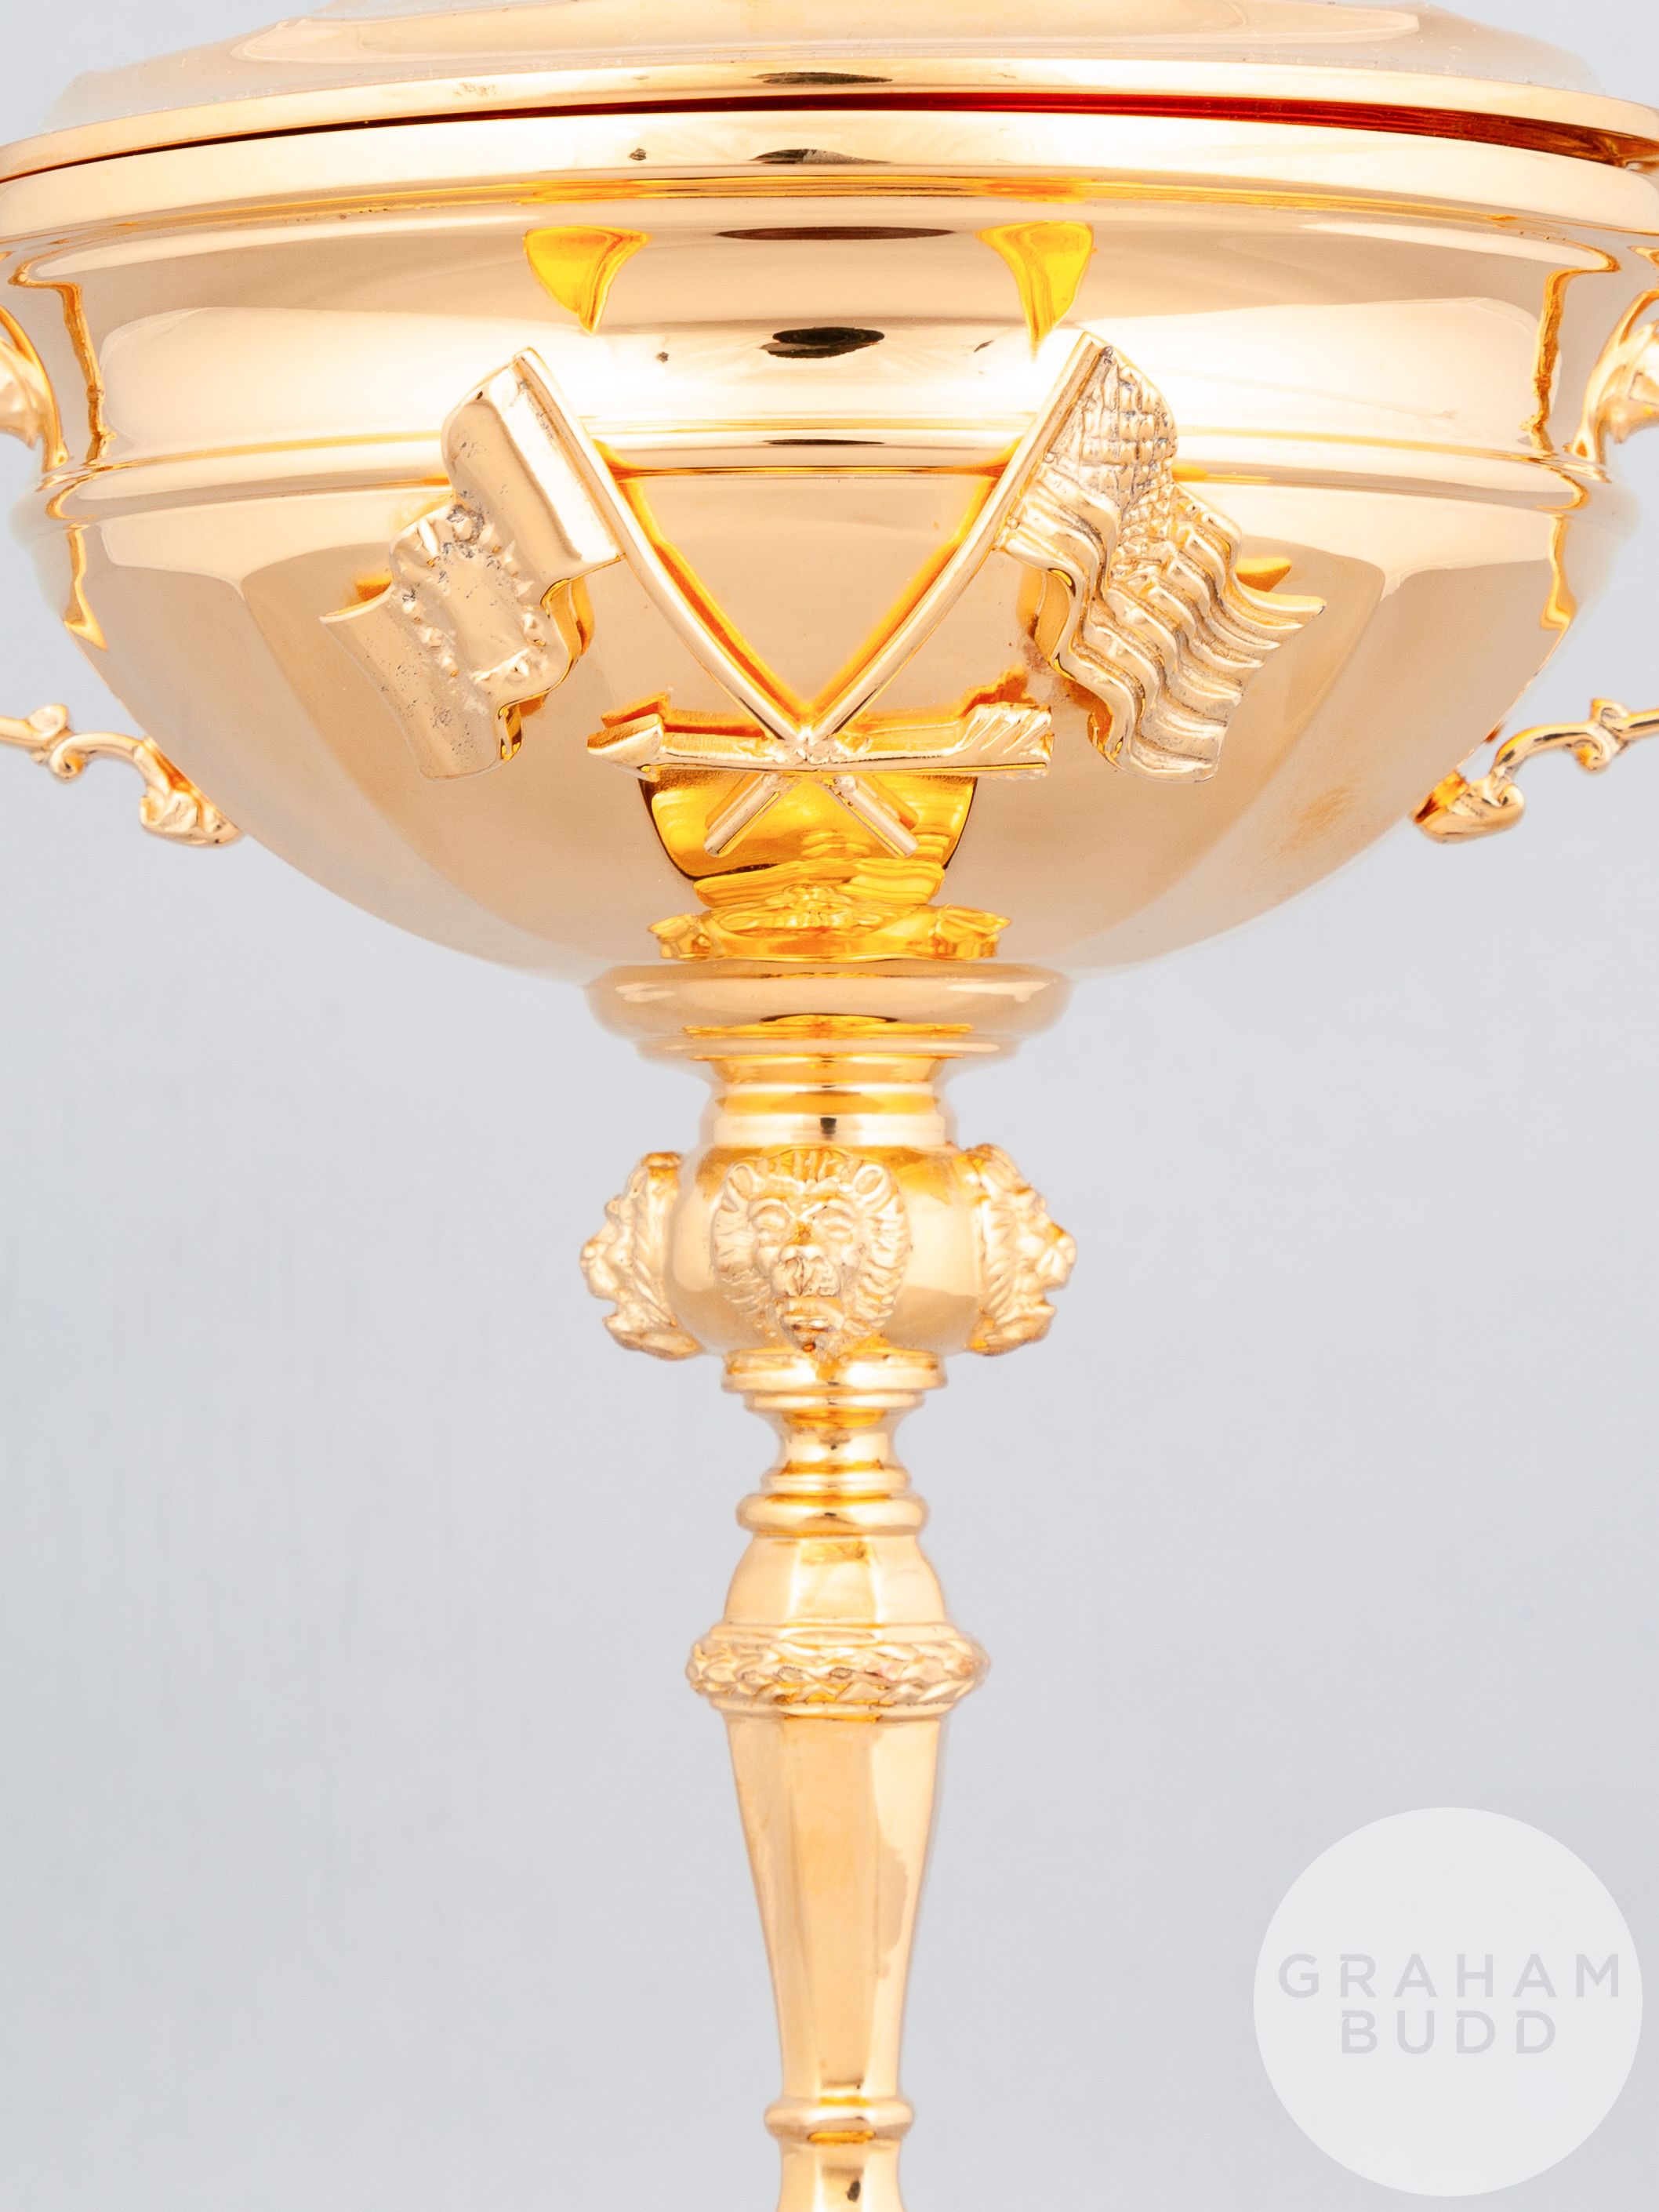 George Will rare silver-gilt replica Ryder Cup trophy - Image 6 of 11